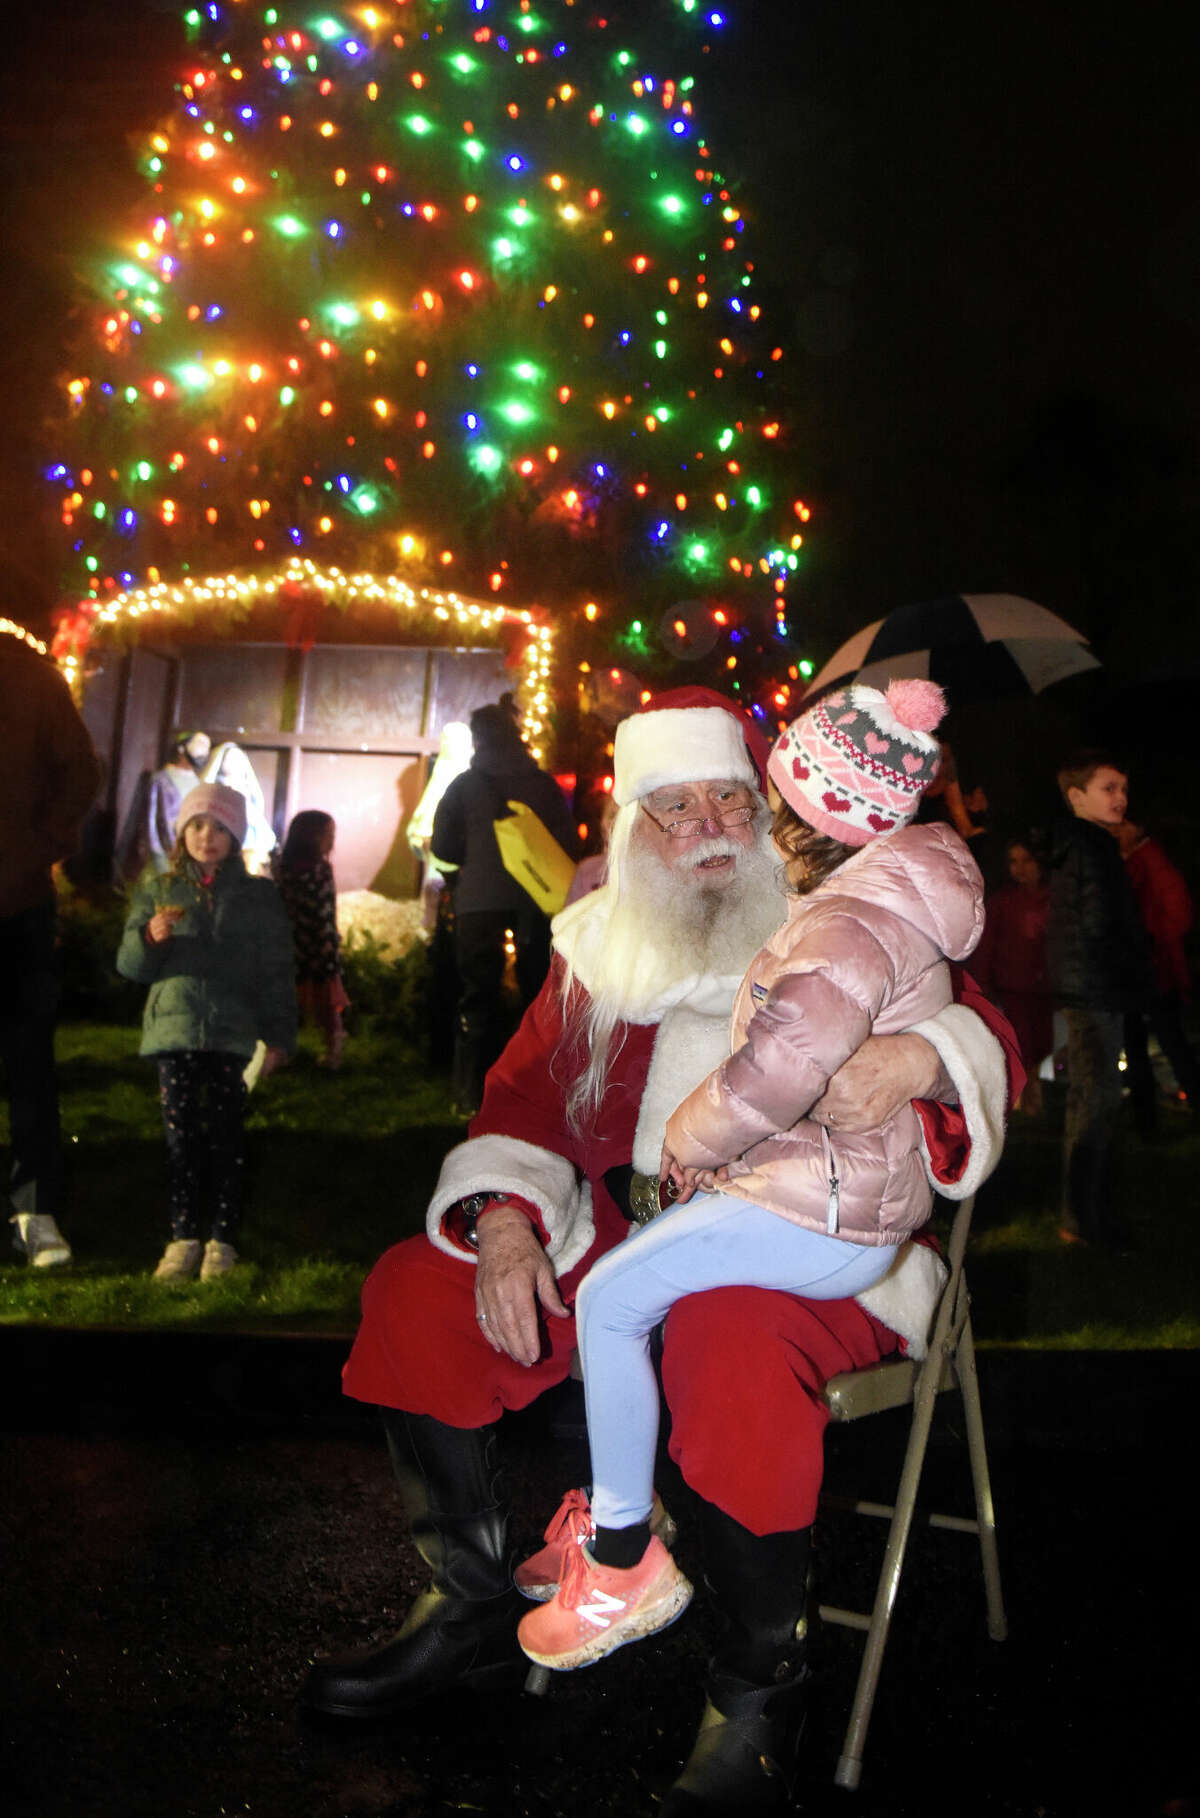 Darien's Camila Visi, 5, sits on Santa's lap at the annual Christmas tree lighting ceremony outside Darien Sport Shop in Darien, Conn. Sunday, Nov. 27, 2022. Santa arrived in the rain Sunday to help light the Christmas tree and pose for photos with children afterwards.